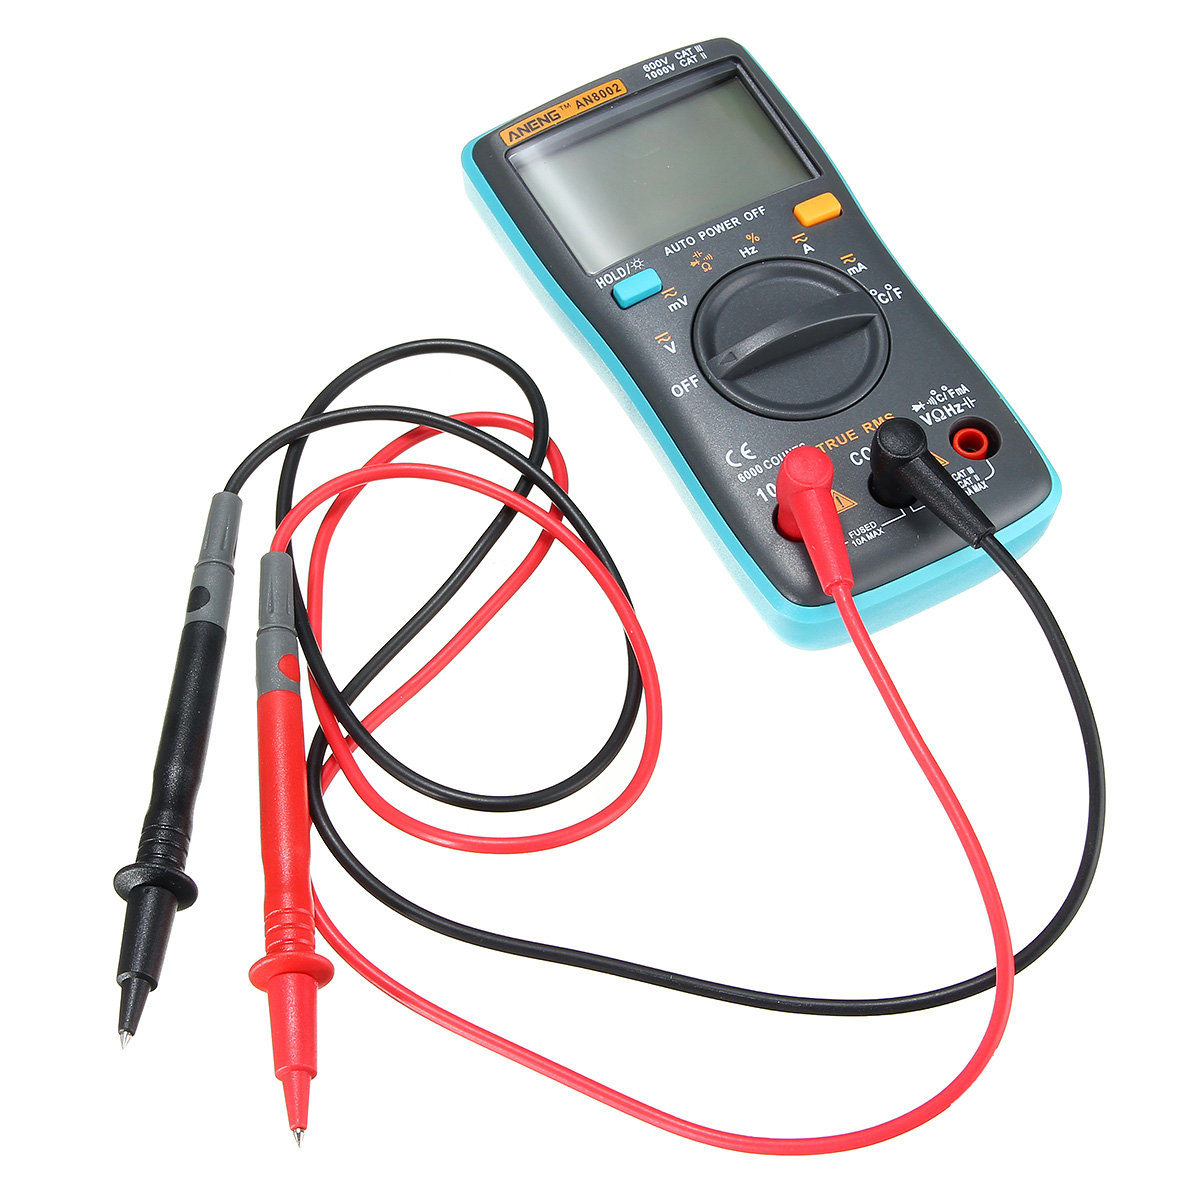 ANENG AN8002 Digital True RMS 6000 Counts Multimeter AC/DC Current Voltage Frequency Resistance Temperature Tester ℃/℉ 156